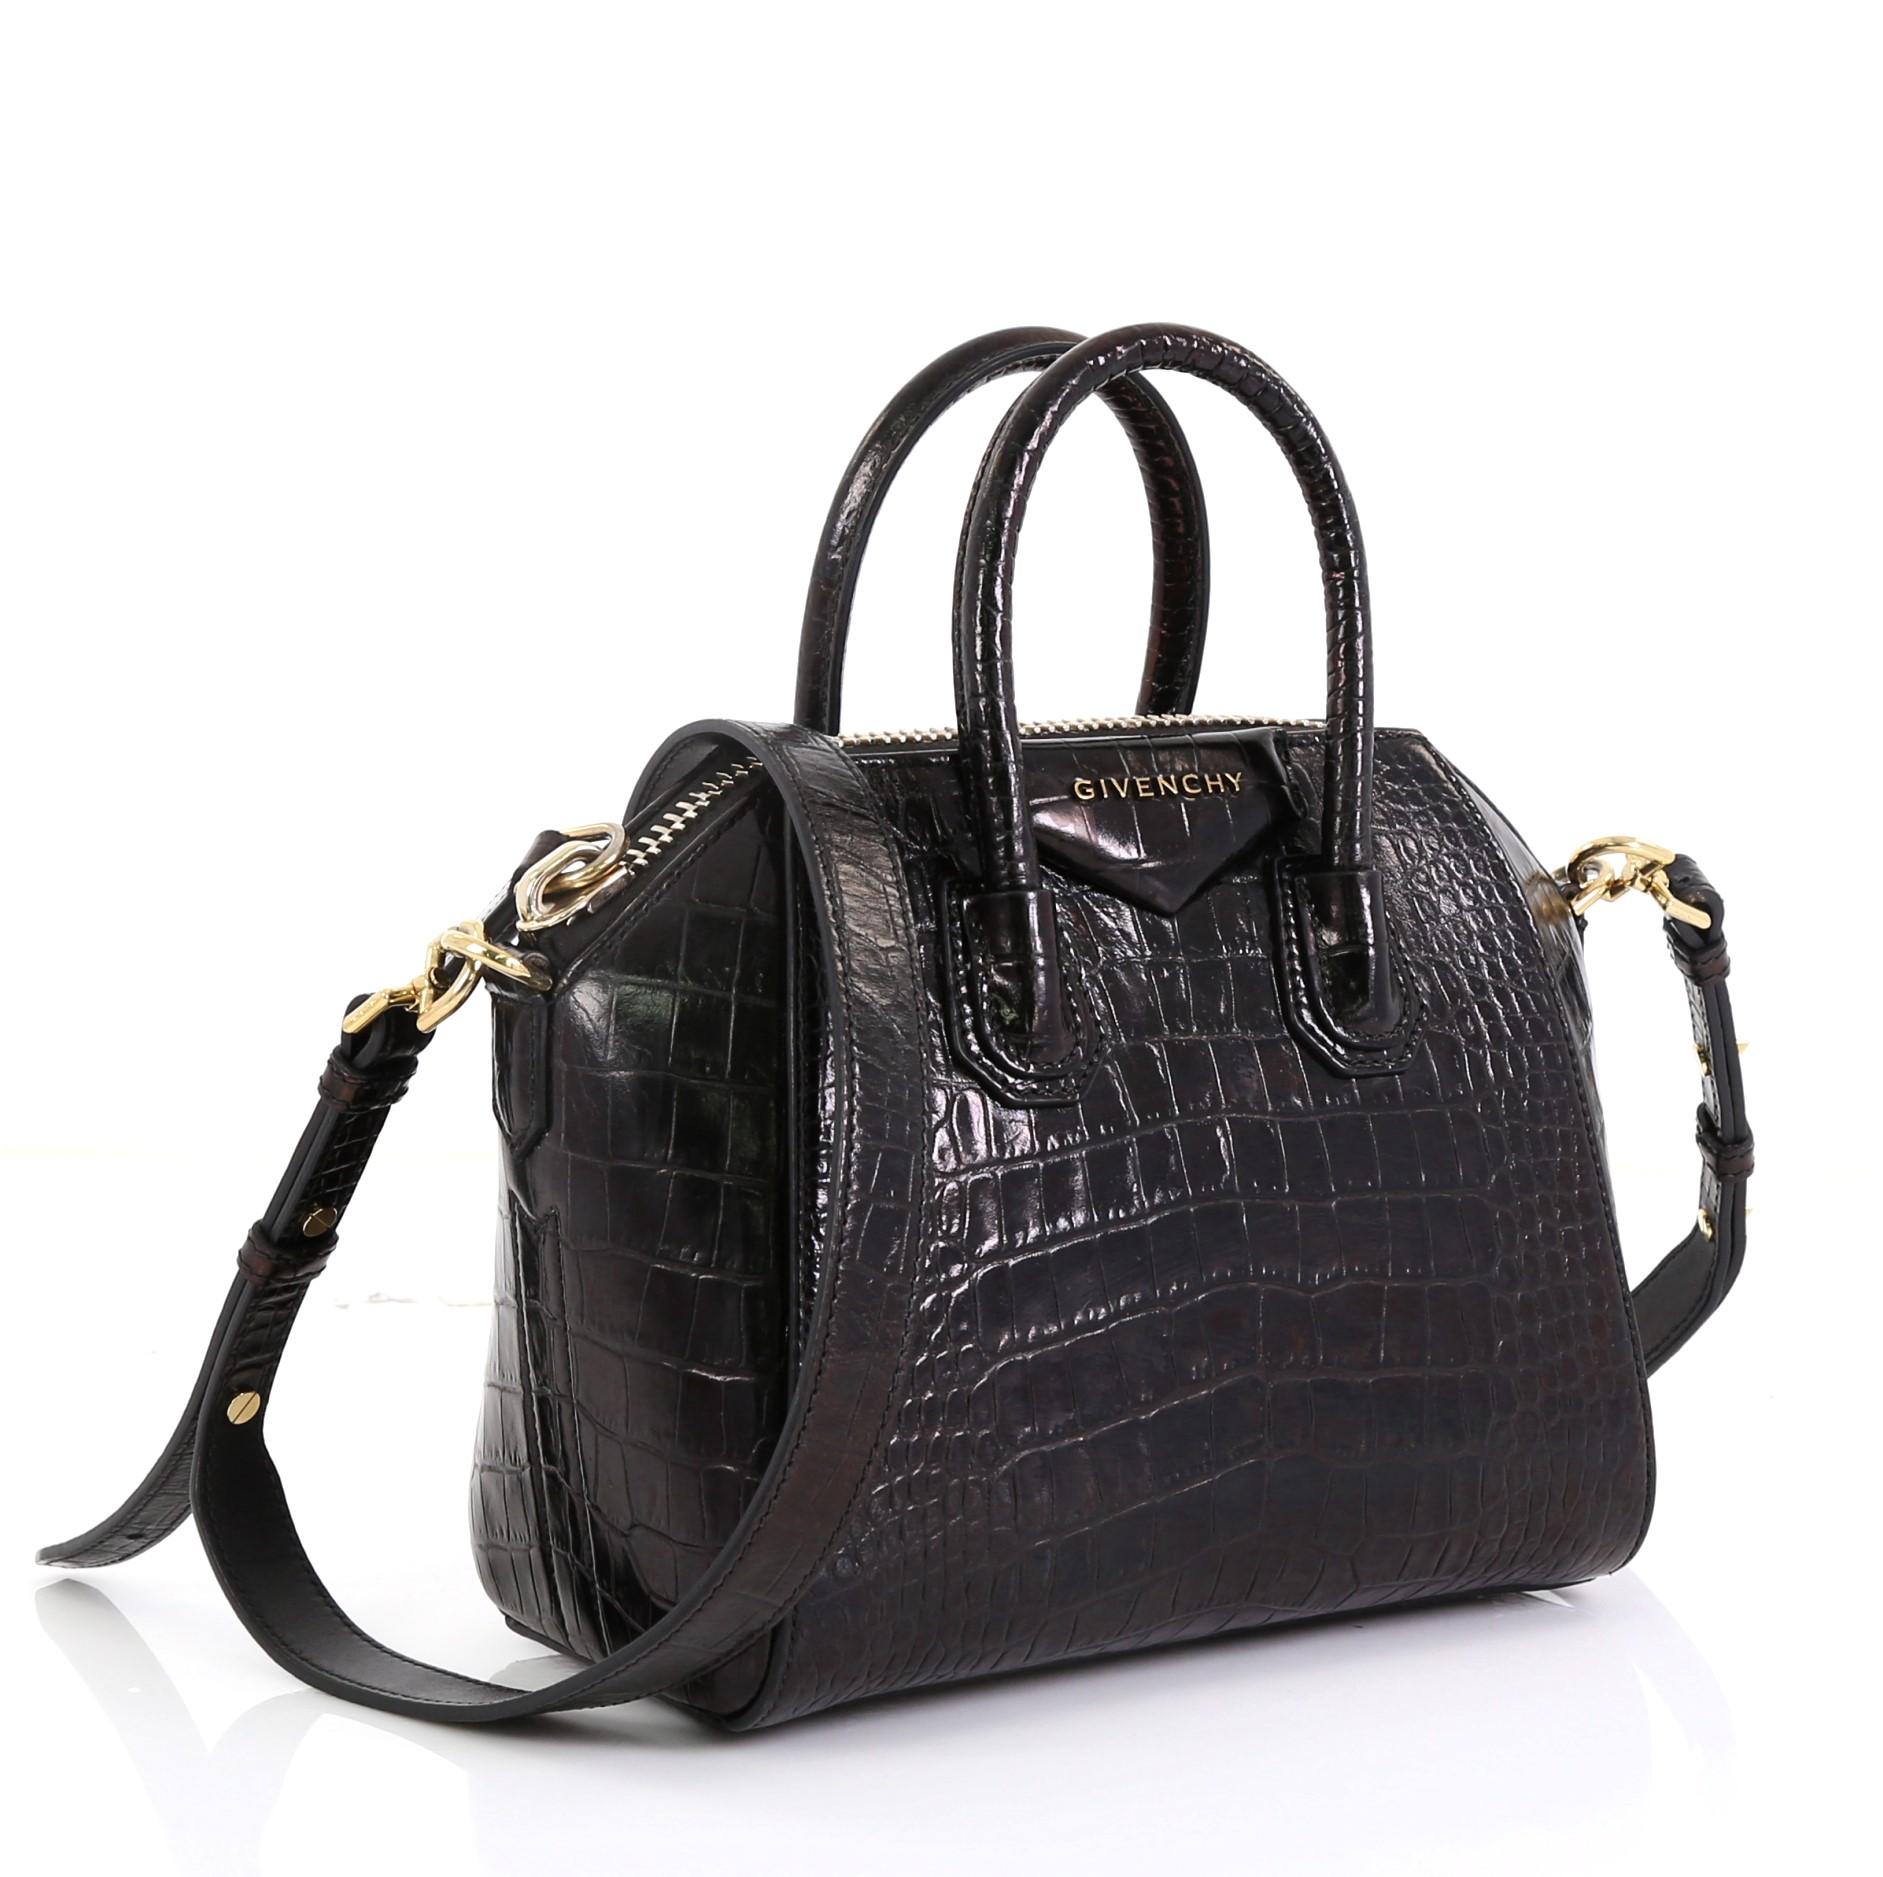 This Givenchy Antigona Bag Crocodile Embossed Leather Mini, crafted from black crocodile embossed leather, features dual rolled leather handles and gold-tone hardware. Its zip closure opens to a black fabric interior with zip and slip pockets.